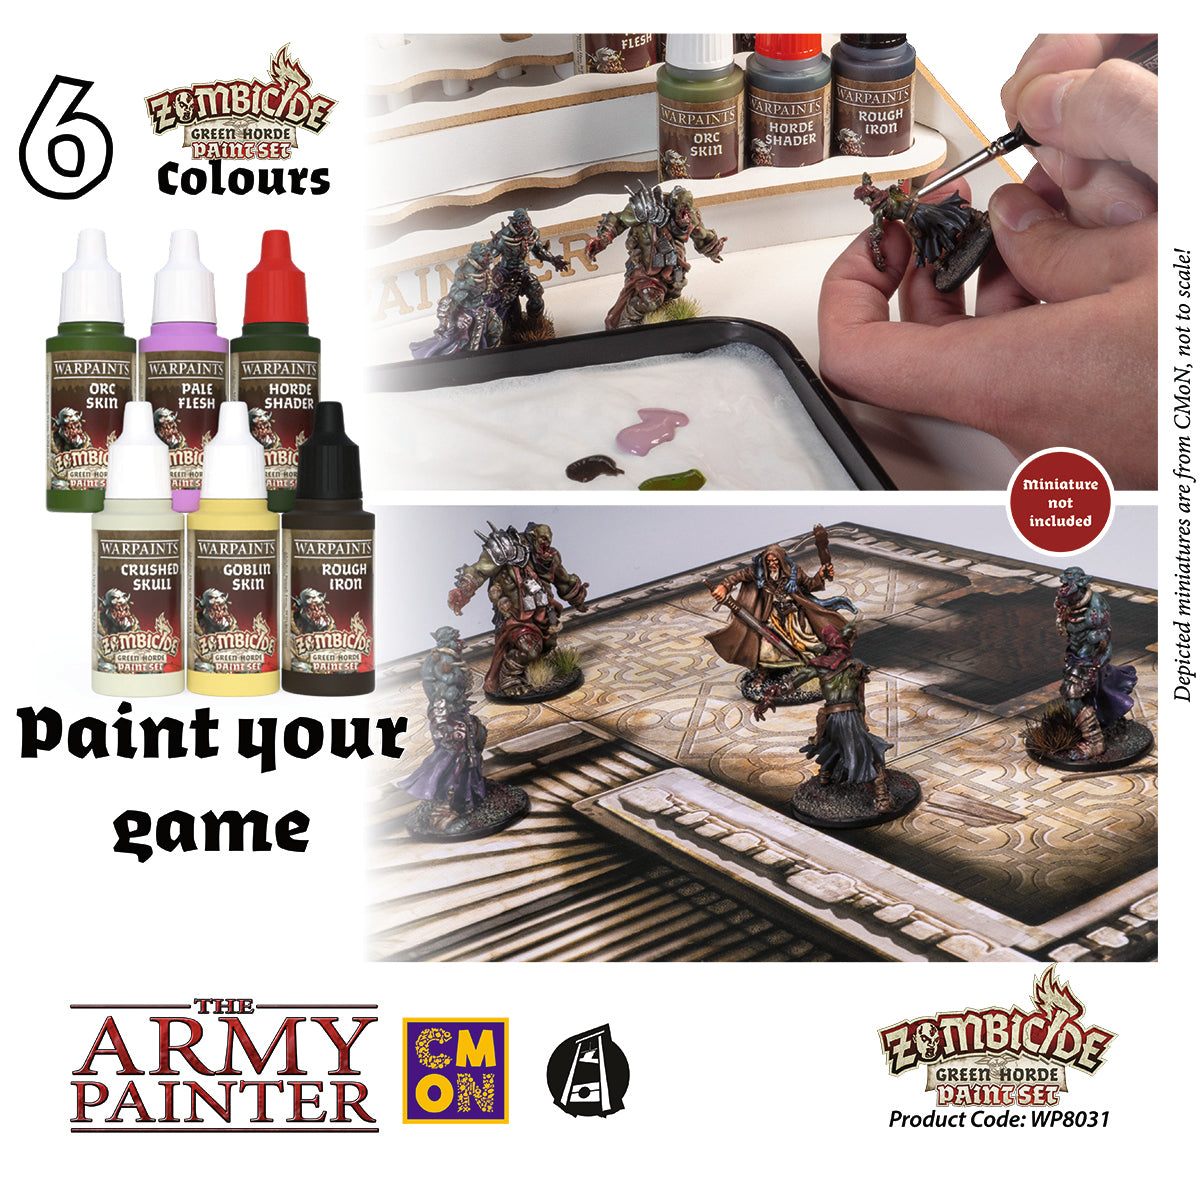 Warpaints - Ideal for highly-detailed miniatures - The Army Painter